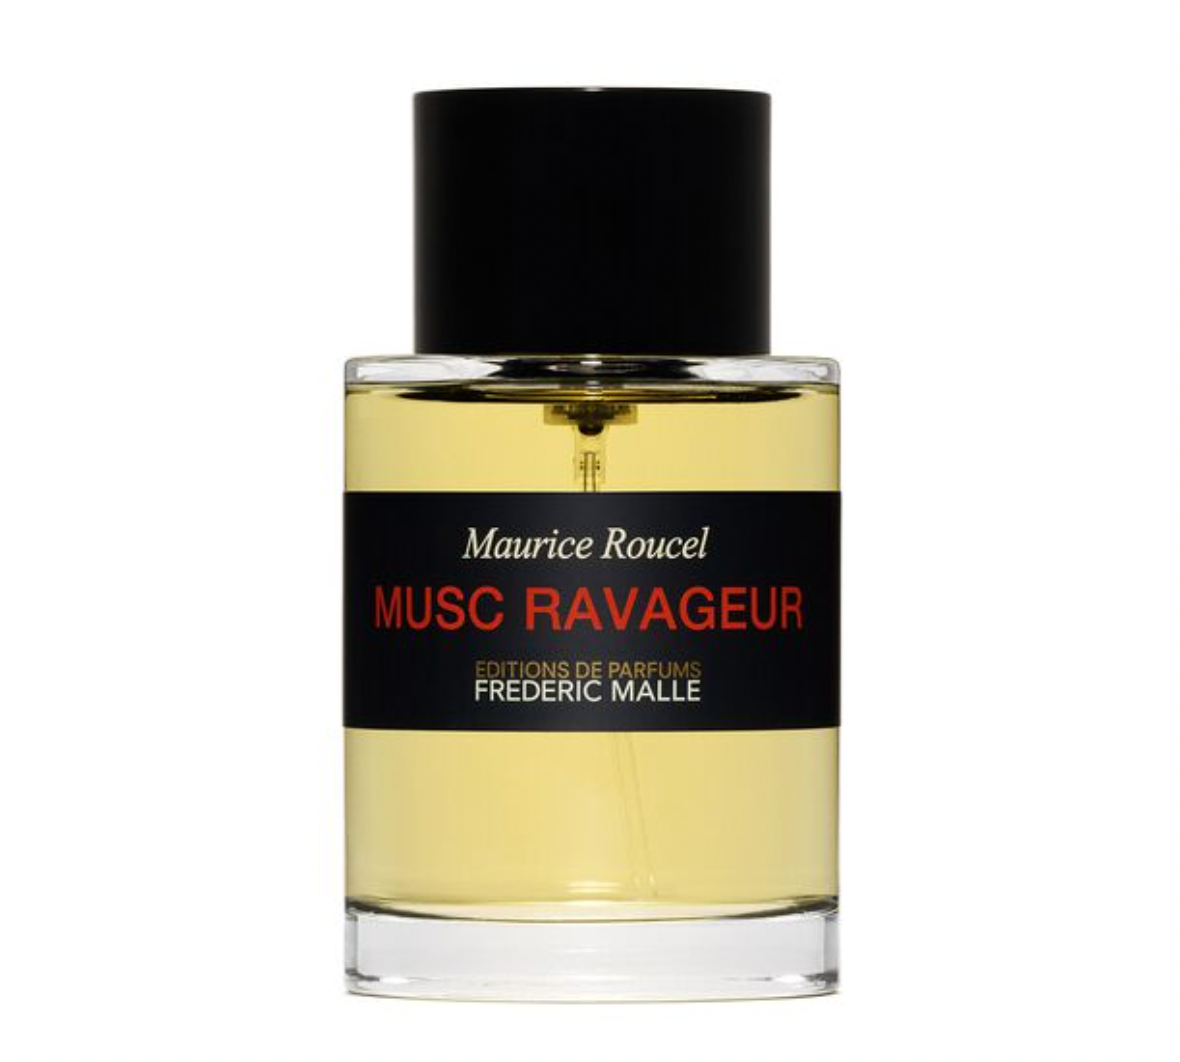 FREDERIC MALLE - Musc Ravageur